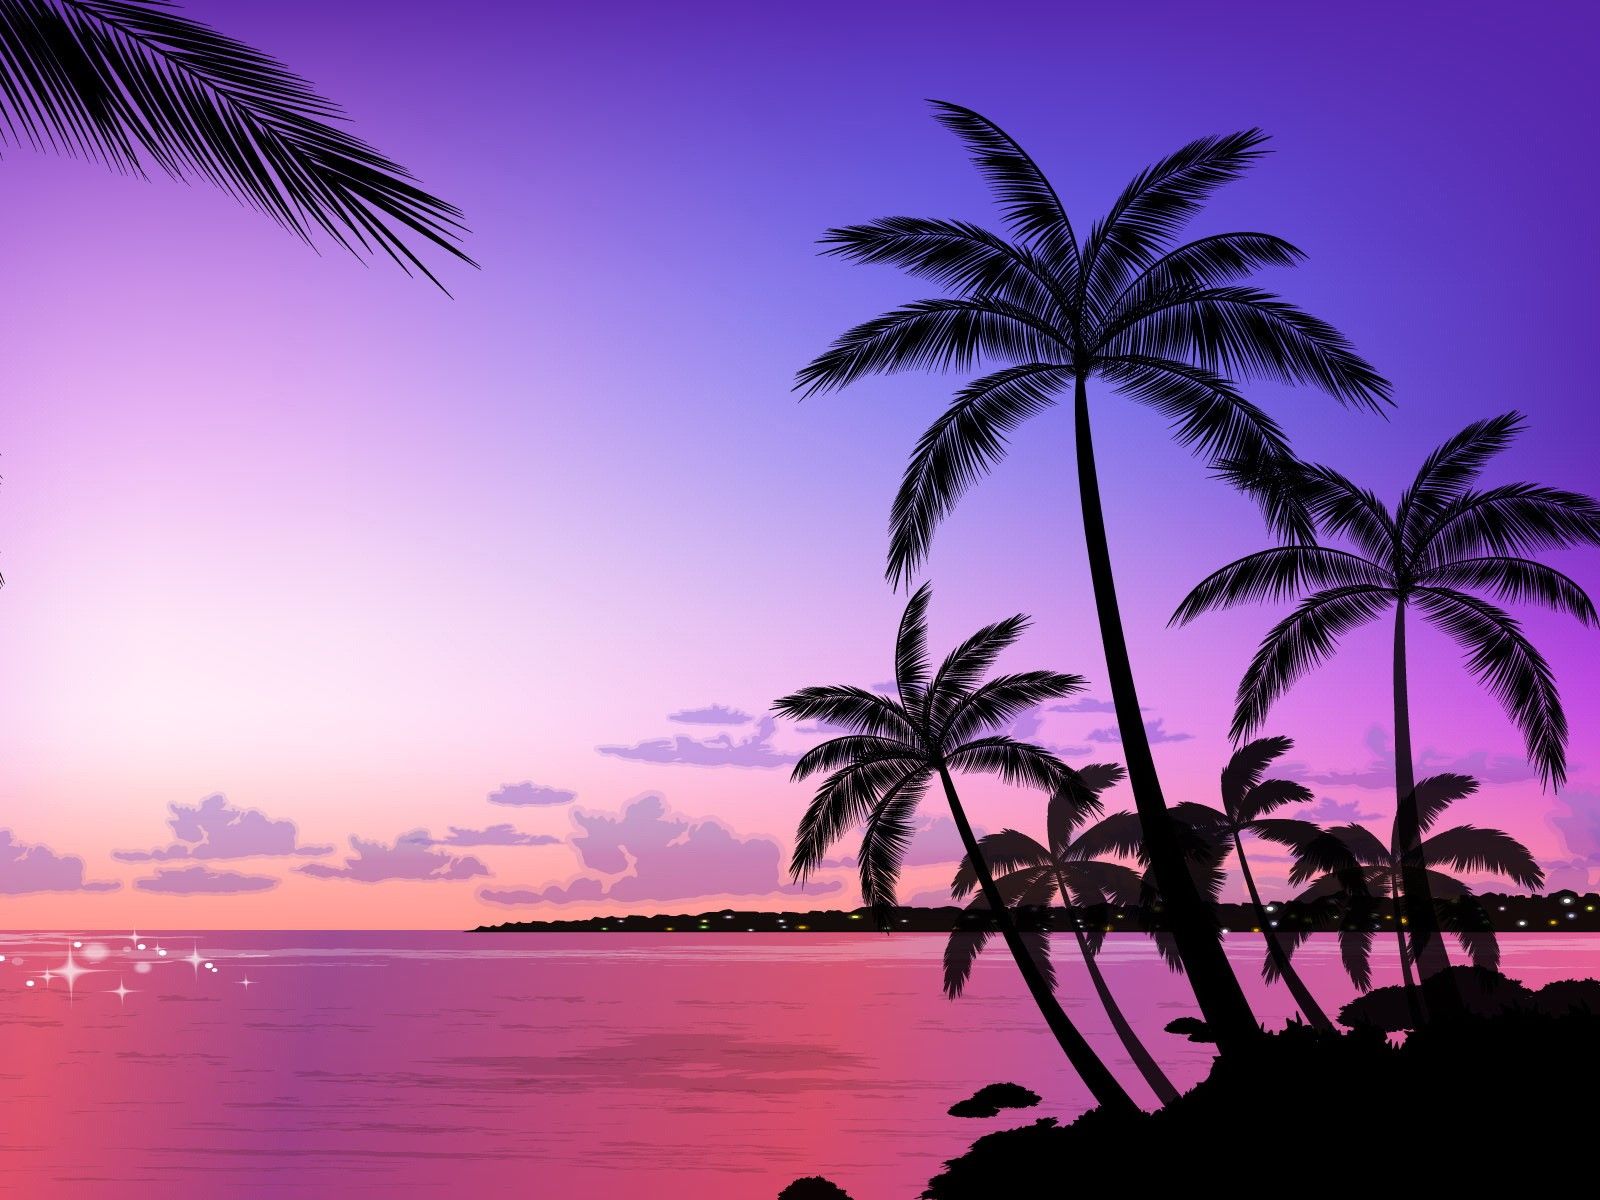 Palm Trees With Orange And Pink Gradient Workshop Ideas